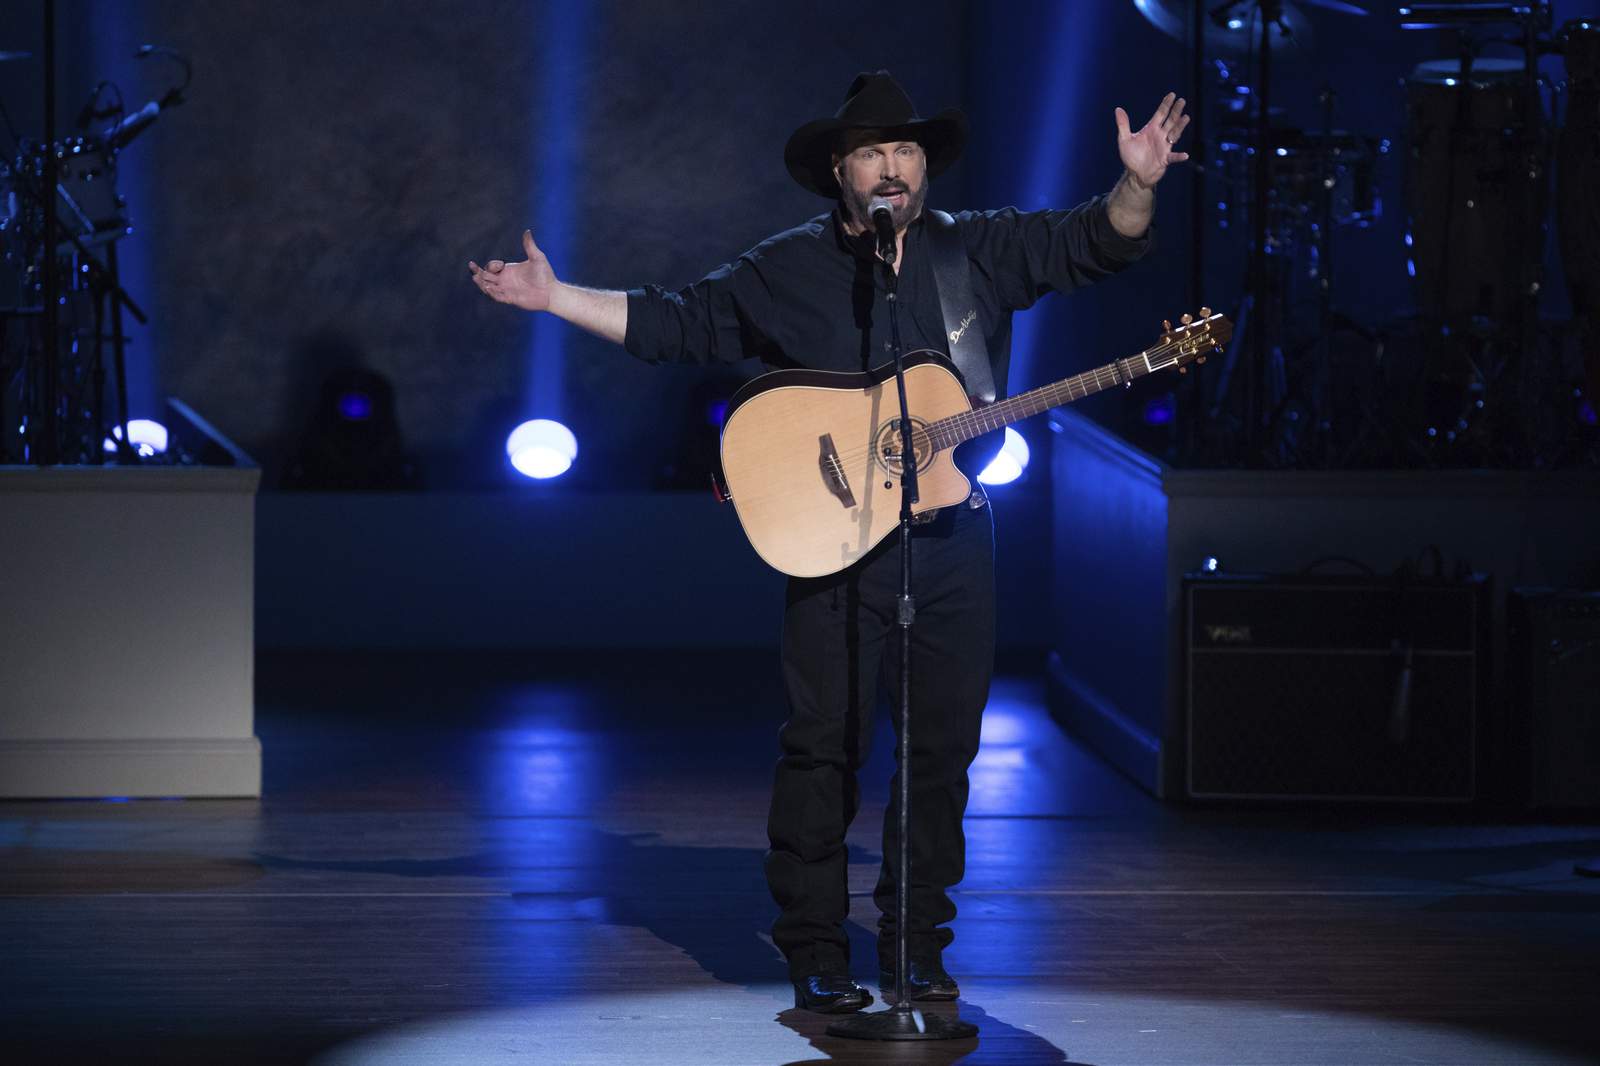 Garth Brooks joins lineup of entertainers at Biden inaugural